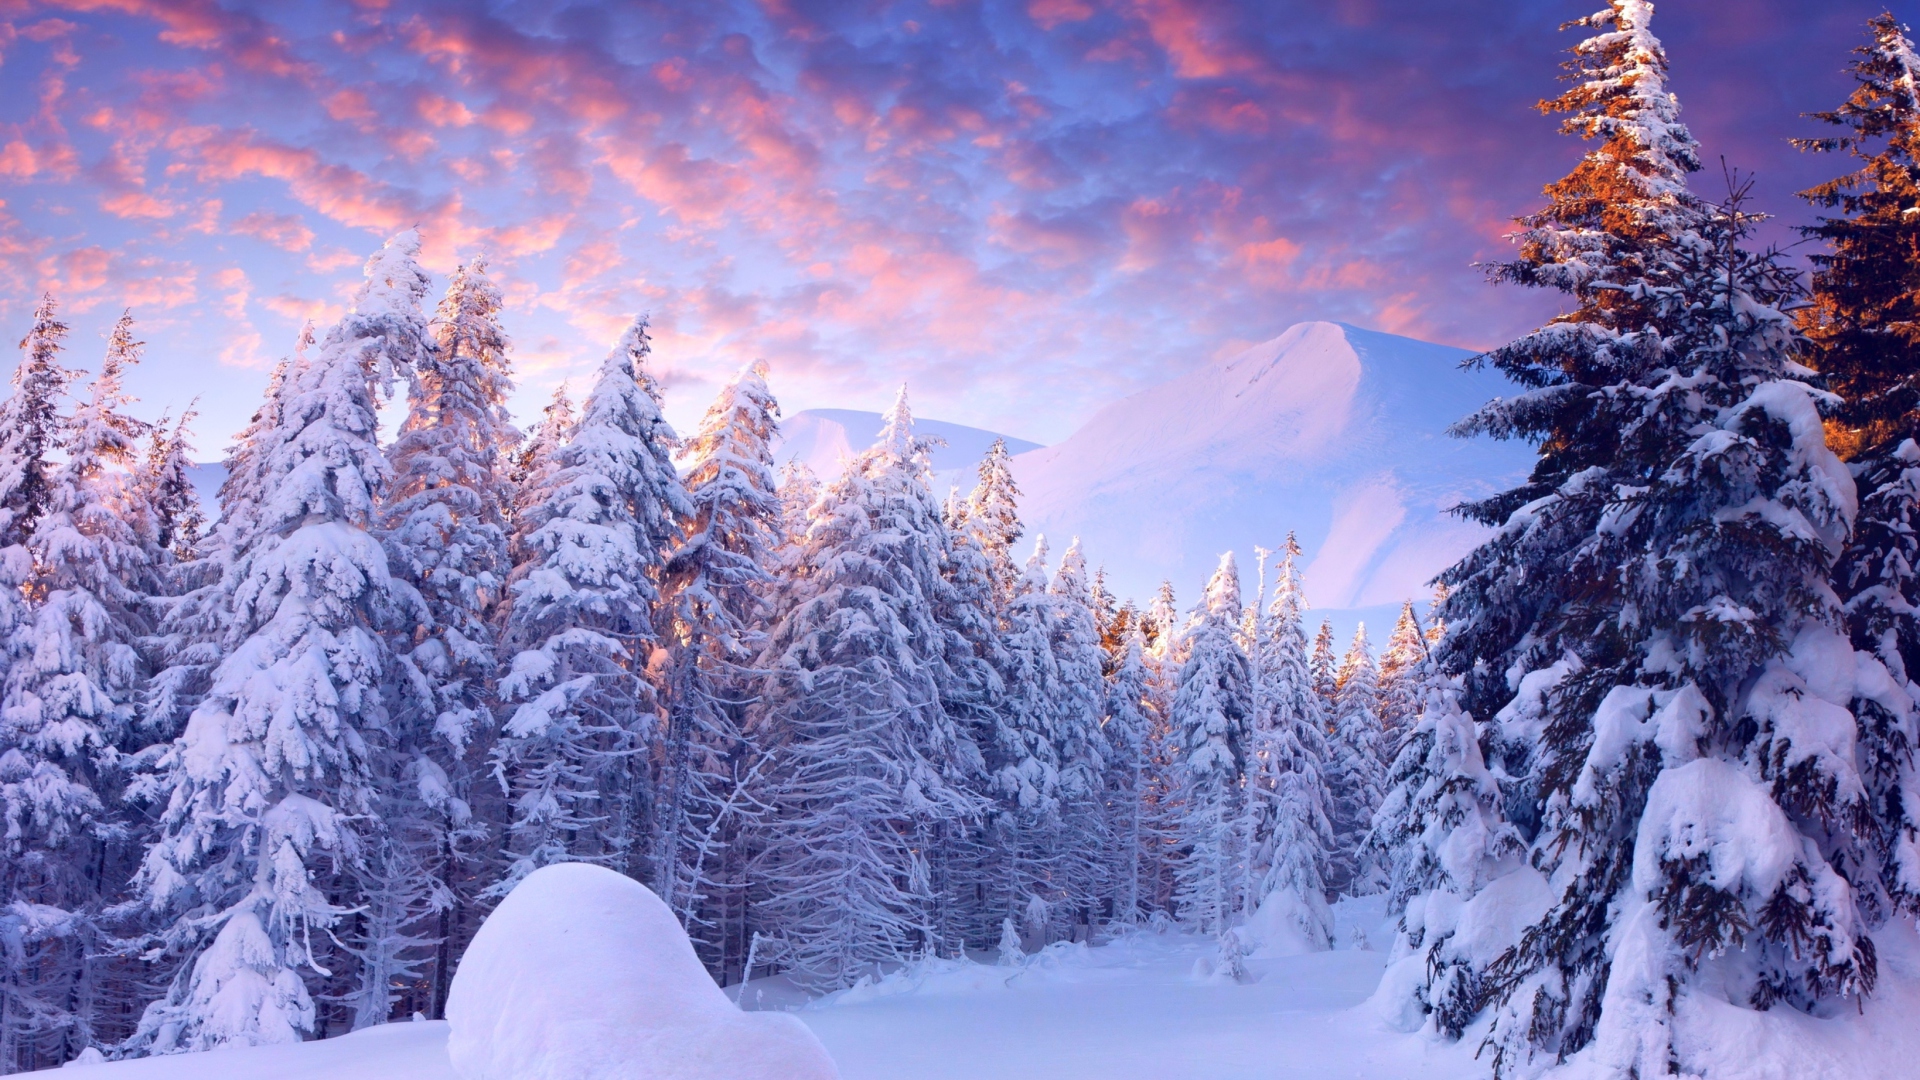 Snowy Christmas Trees In Forest wallpaper 1920x1080